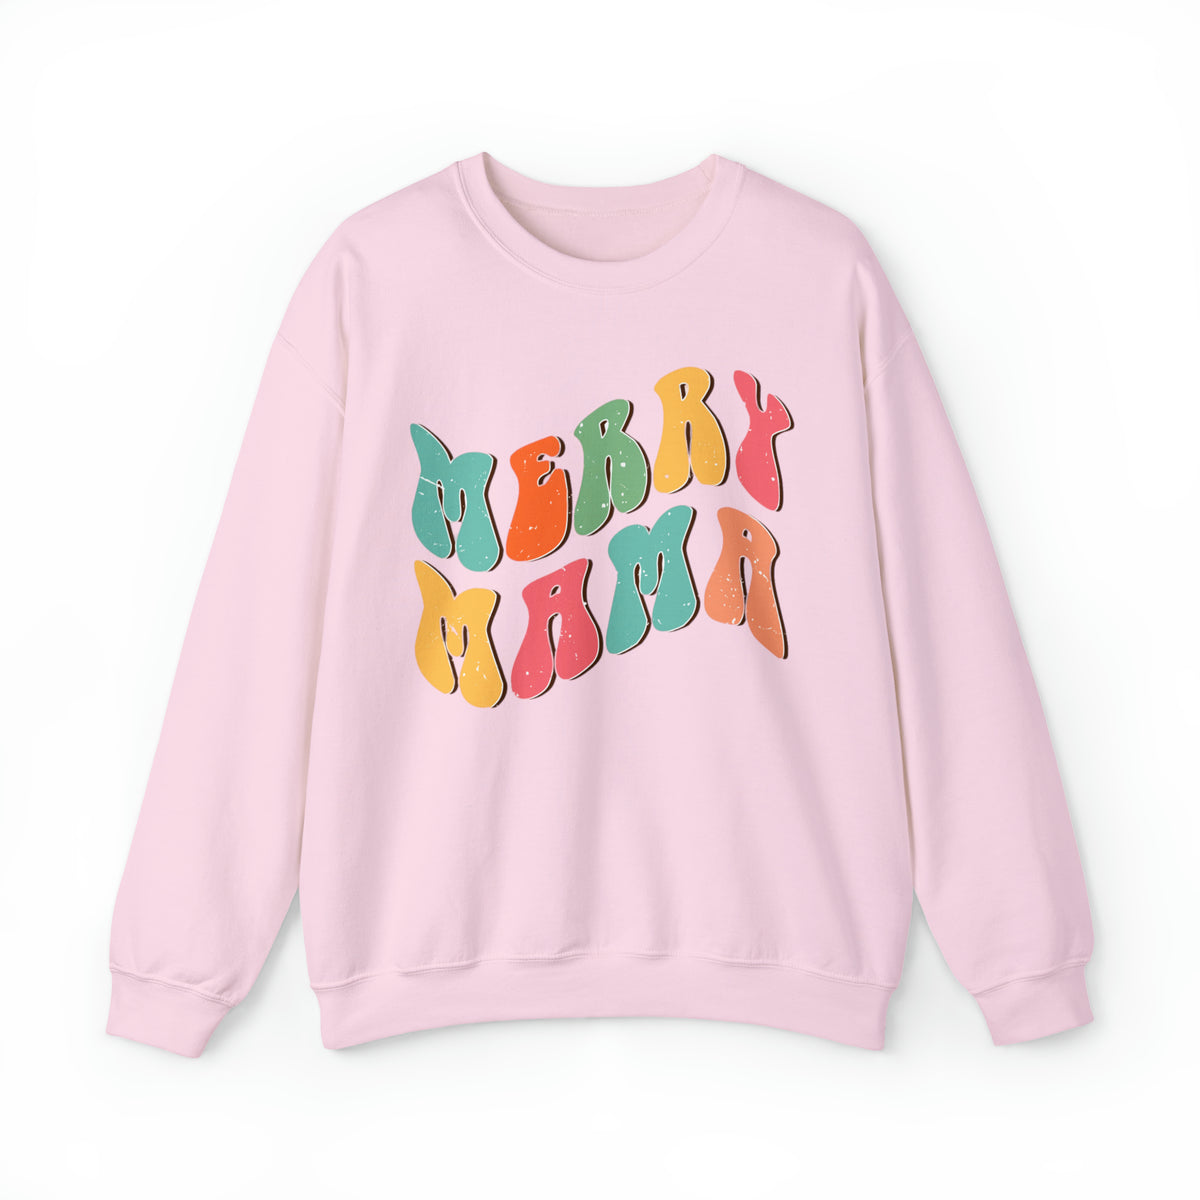 Merry Mama Christmas Sweatshirt, Christmas Sweater, Christmas Party Outfit, Holiday Gifts, Funny Christmas Sweater, Ugly Christmas Sweater, Holiday Sweatshirt for mom, Christmas Sweater for mom